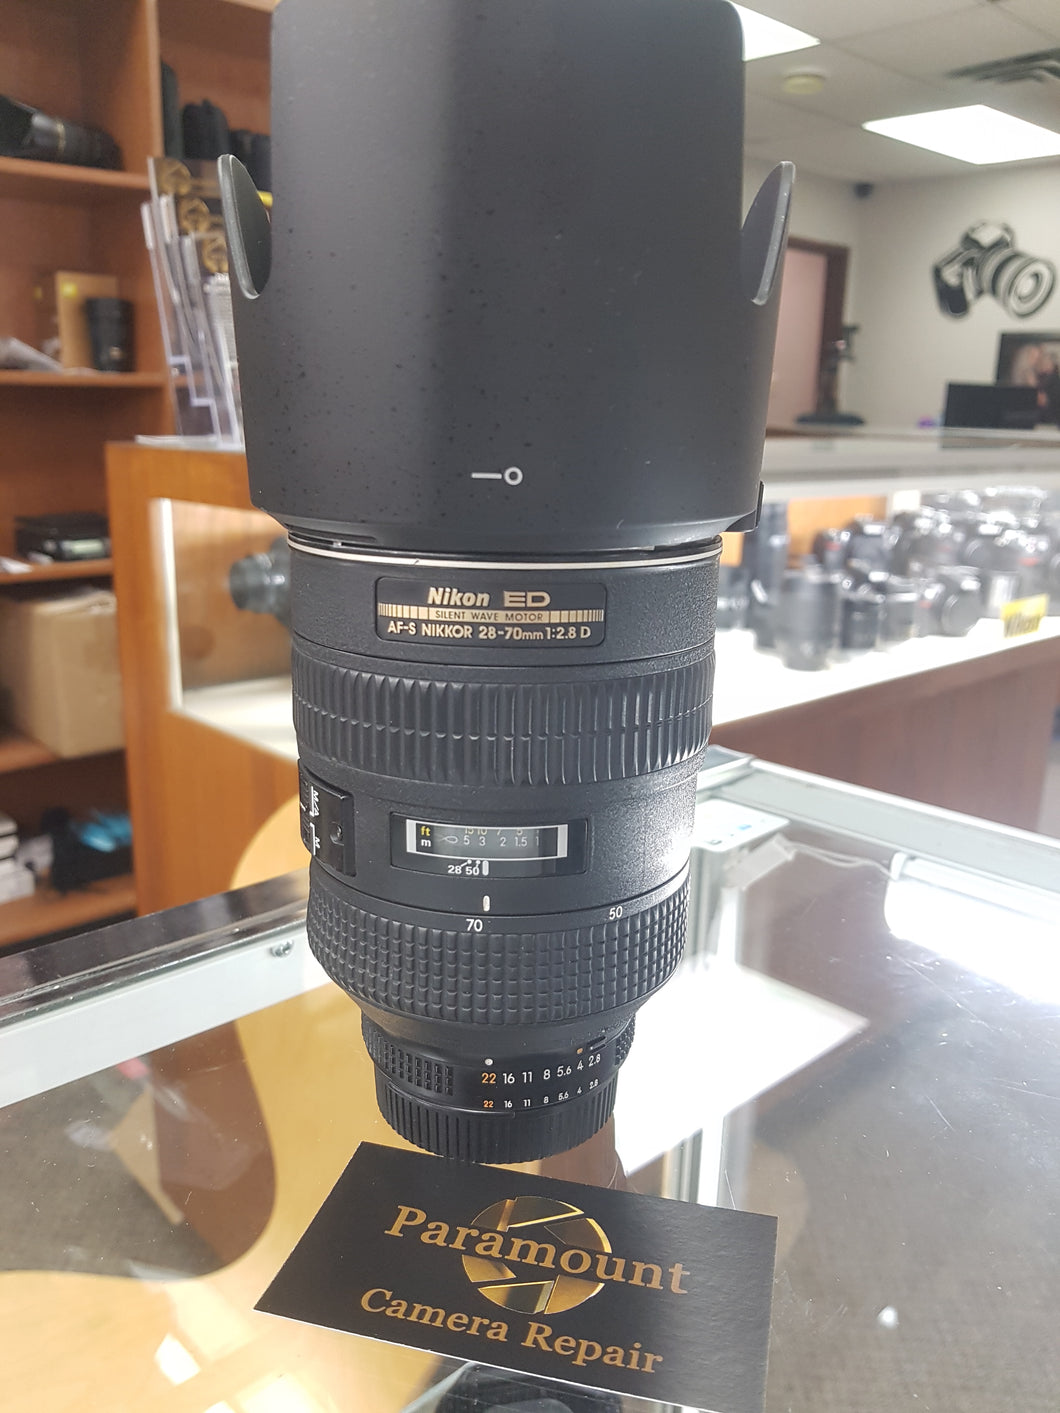 Nikon AF-S 28-70mm f/2.8D ED-IF Lens - Used Condition 8.5/10